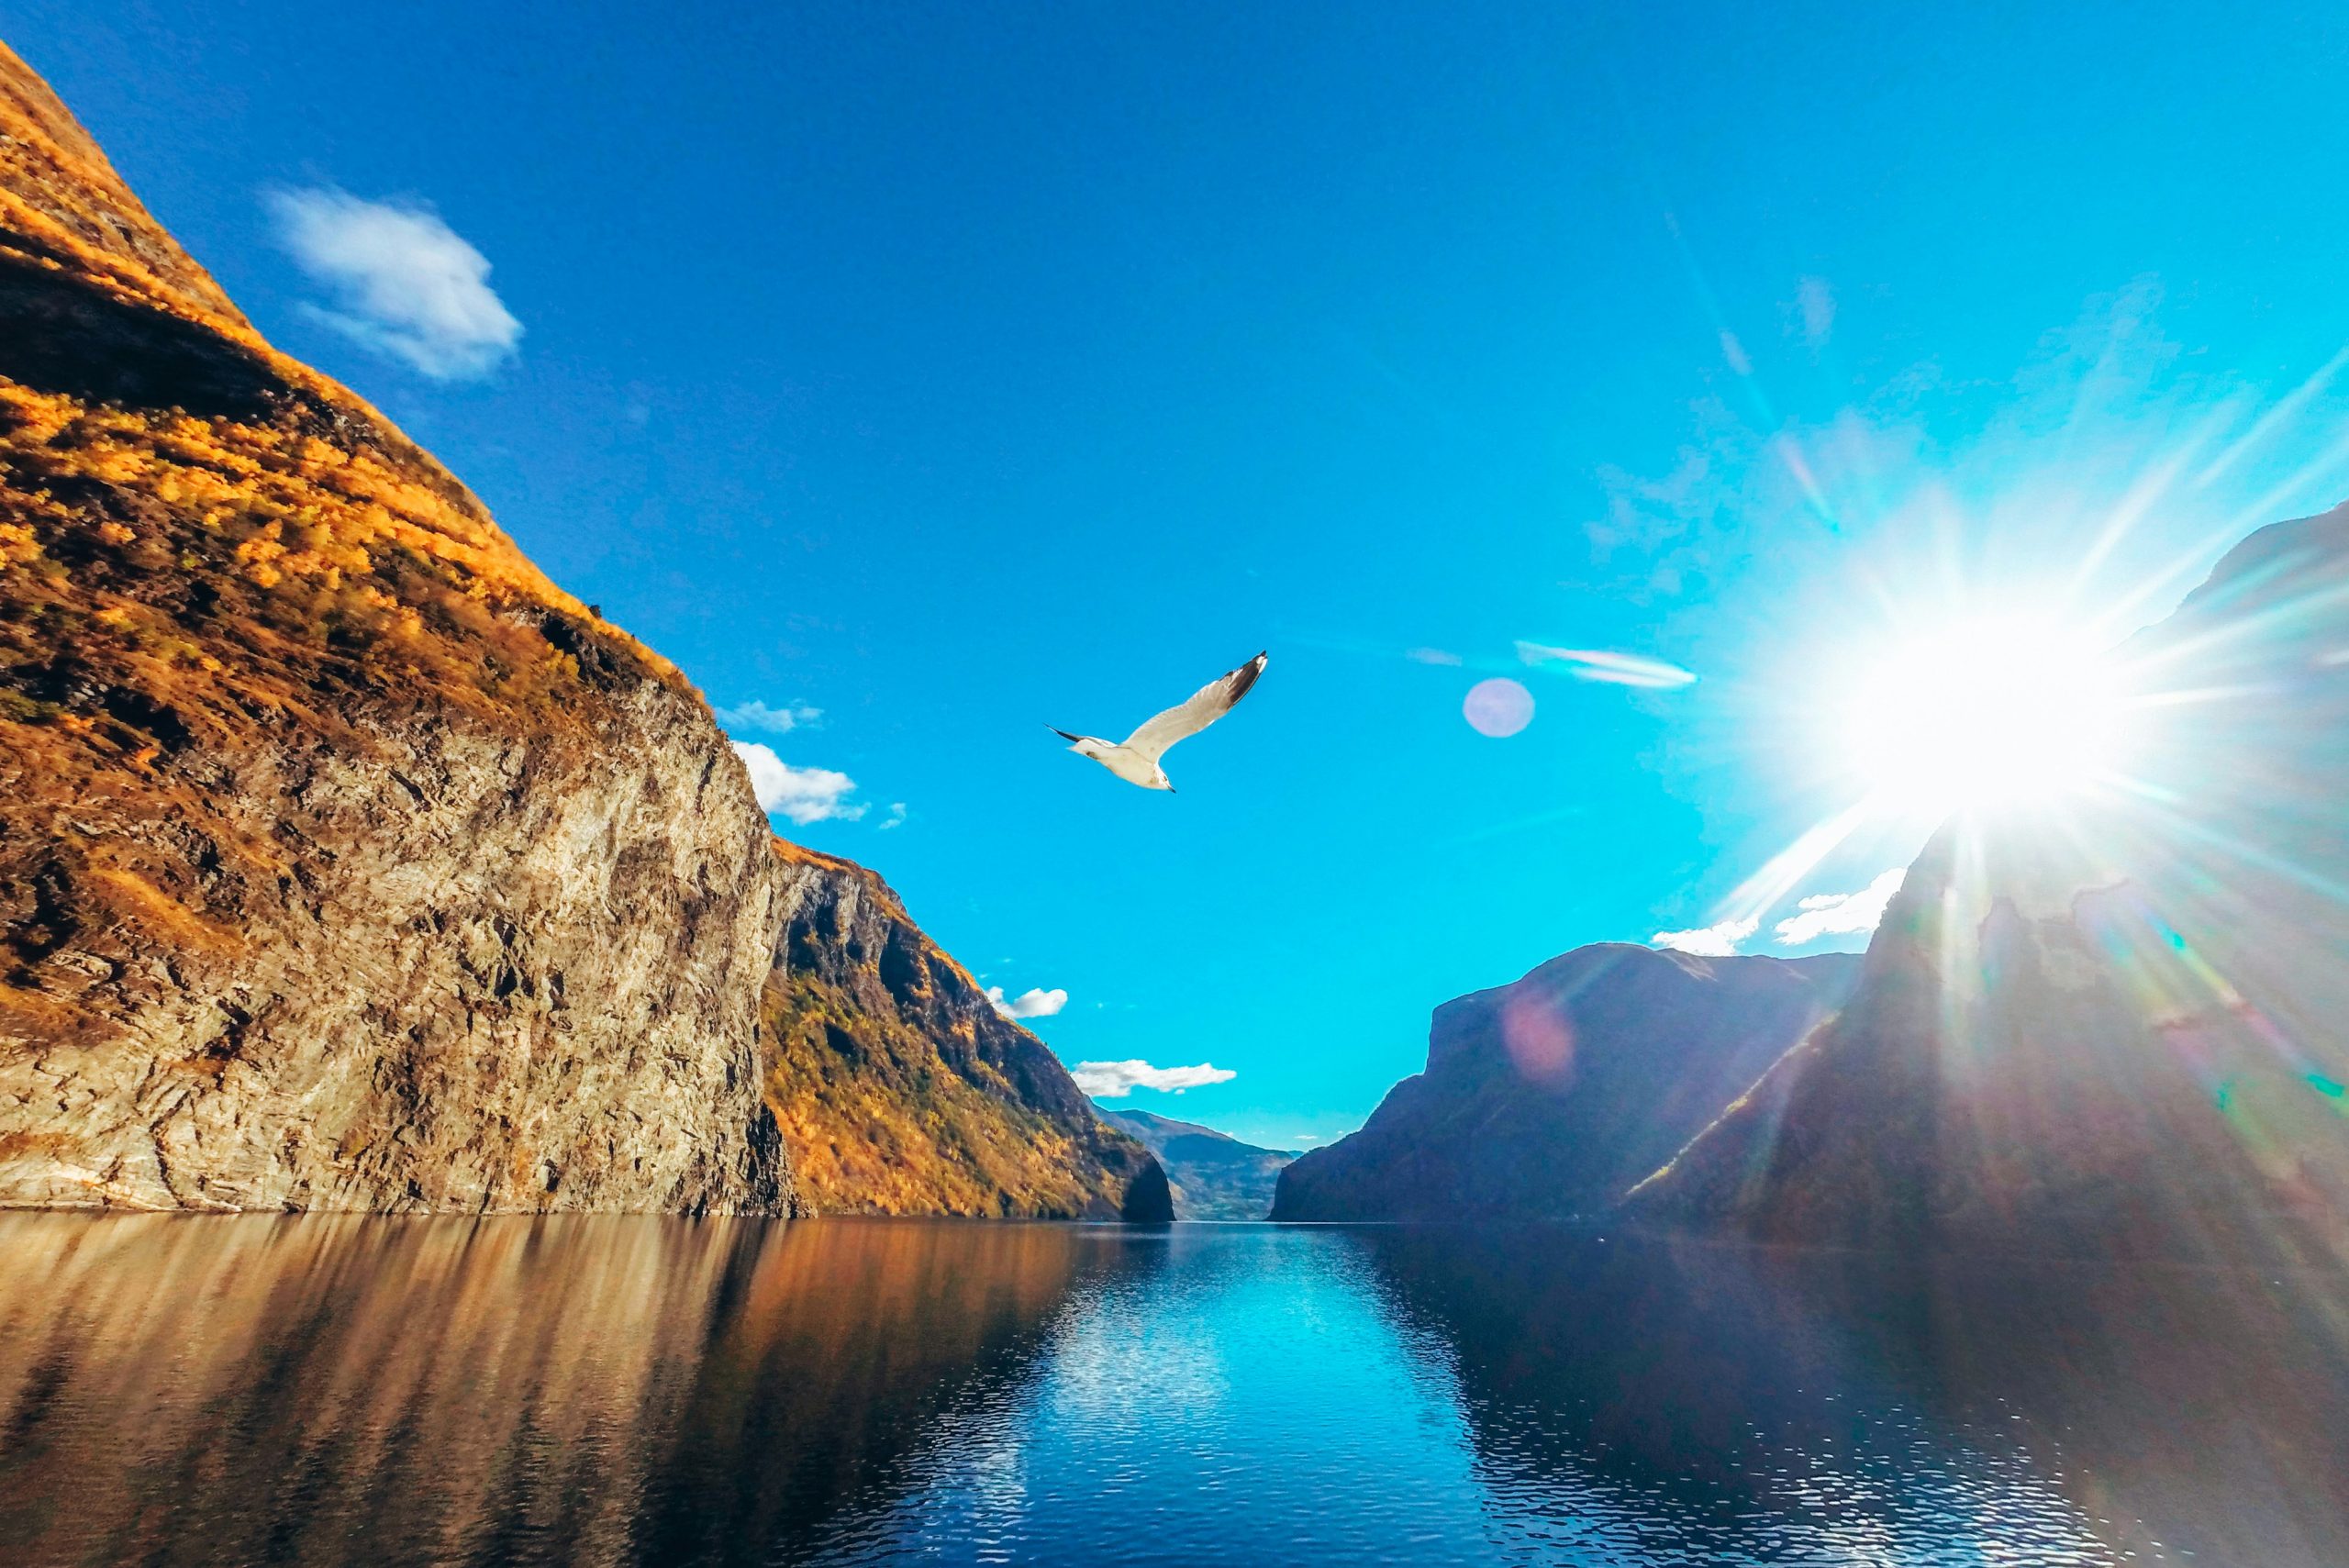 explore the stunning beauty of norway's fjords - a must-see natural wonder with breathtaking landscapes, dramatic cliffs, and crystal-clear waters.